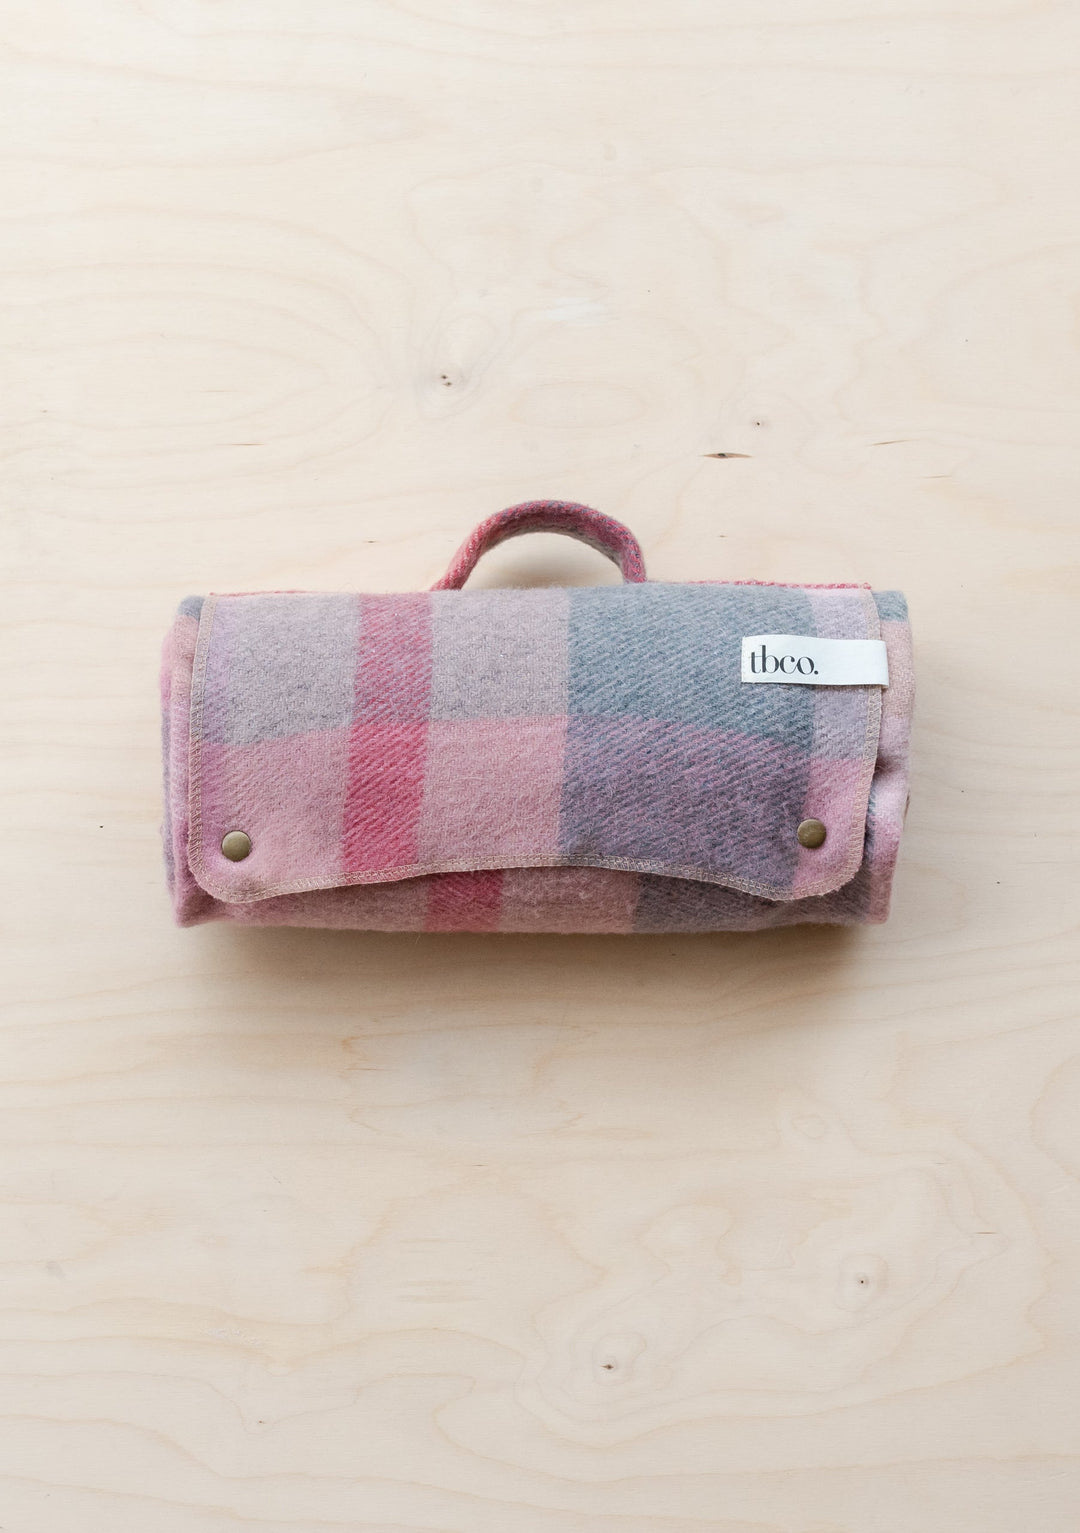 Kleine Picknickdecke aus recycelter Wolle in rosa Patchwork-Karomuster